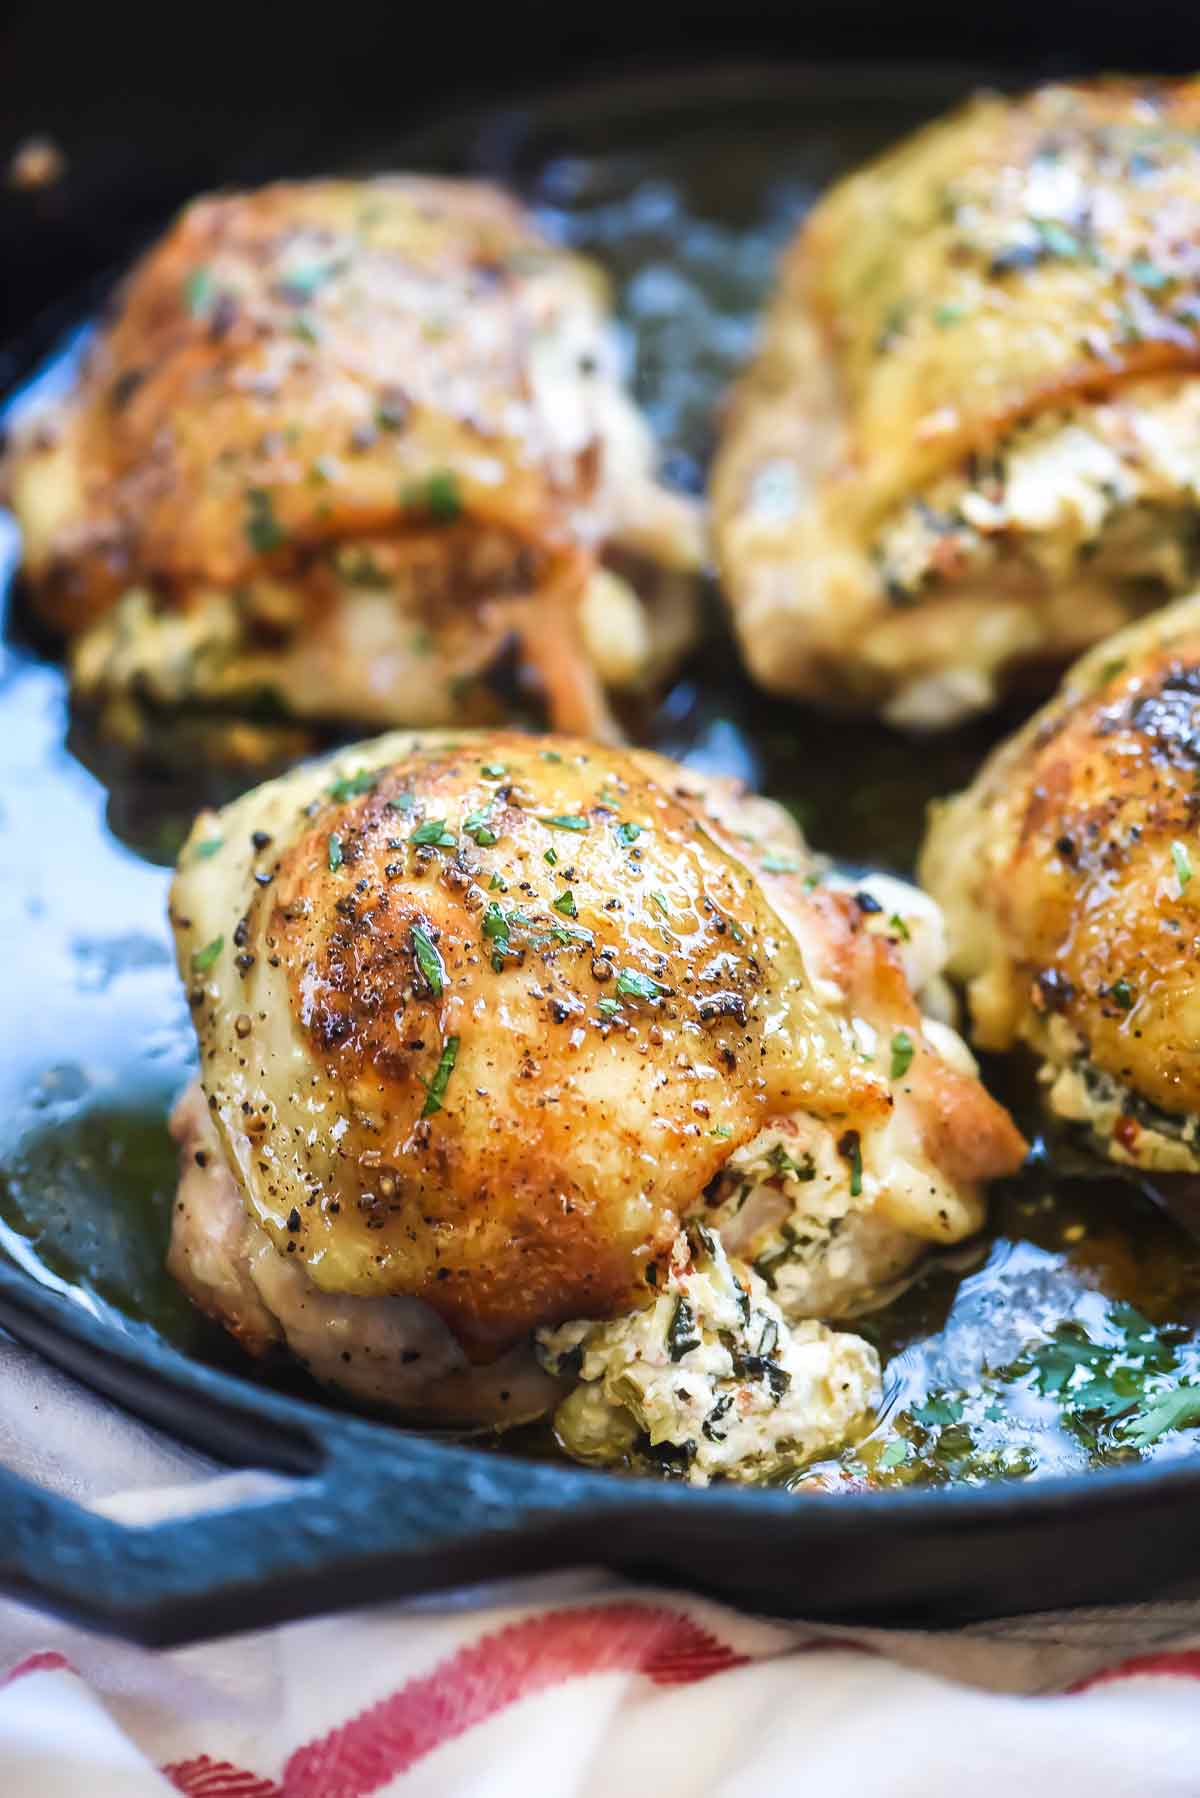 Stuffed Chicken Thighs with Spinach and Goat Cheese is the best 30-minute, cast iron chicken recipe thanks to it's cheesy center and crispy skin | foodiecrush.com #chicken #dinner #recipe #foodblogger #spinach #cheese